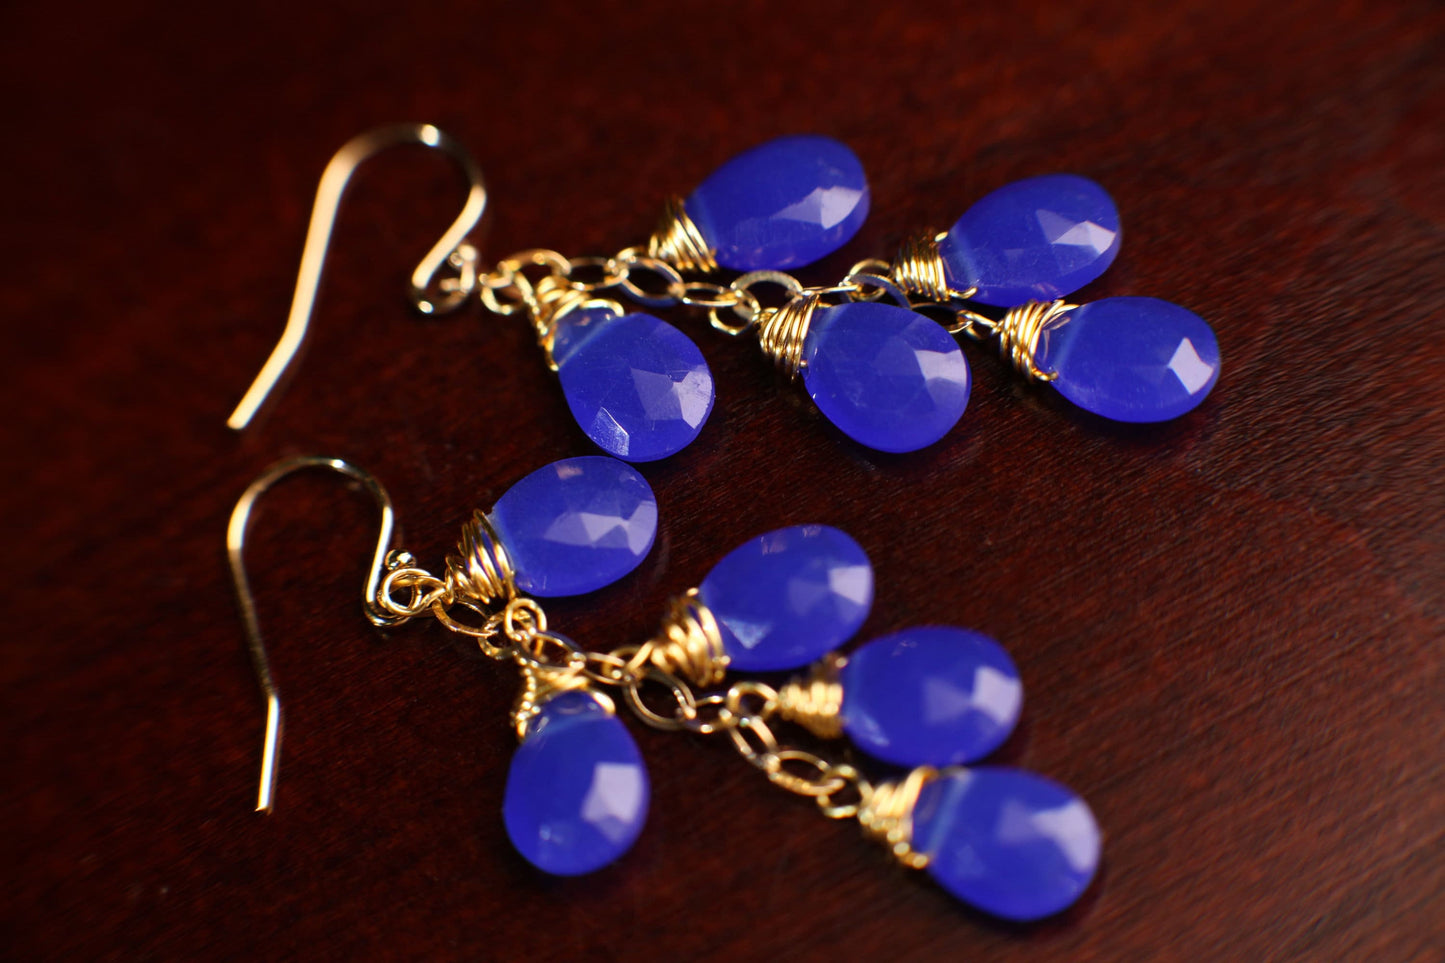 Royal Blue ,Cobalt blue Chalcedony Faceted 7x11mm pear Drop Cascade Dangling Wire Wrap earrings,14k Gold Filled or 925 sterling silver